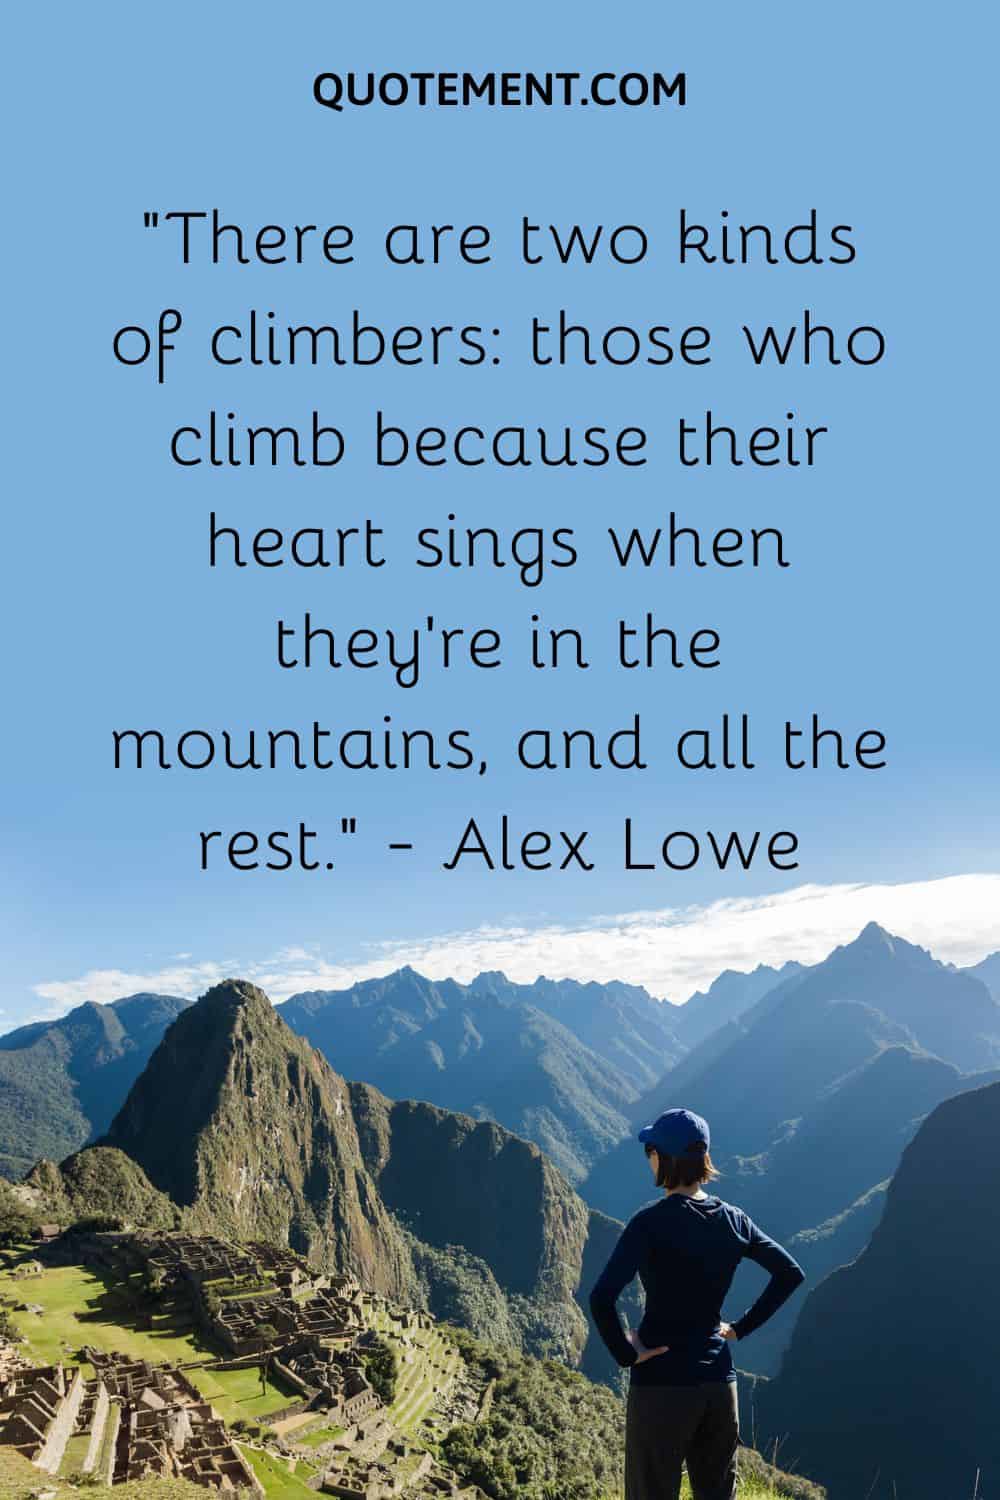 “There are two kinds of climbers those who climb because their heart sings when they’re in the mountains, and all the rest.” — Alex Lowe